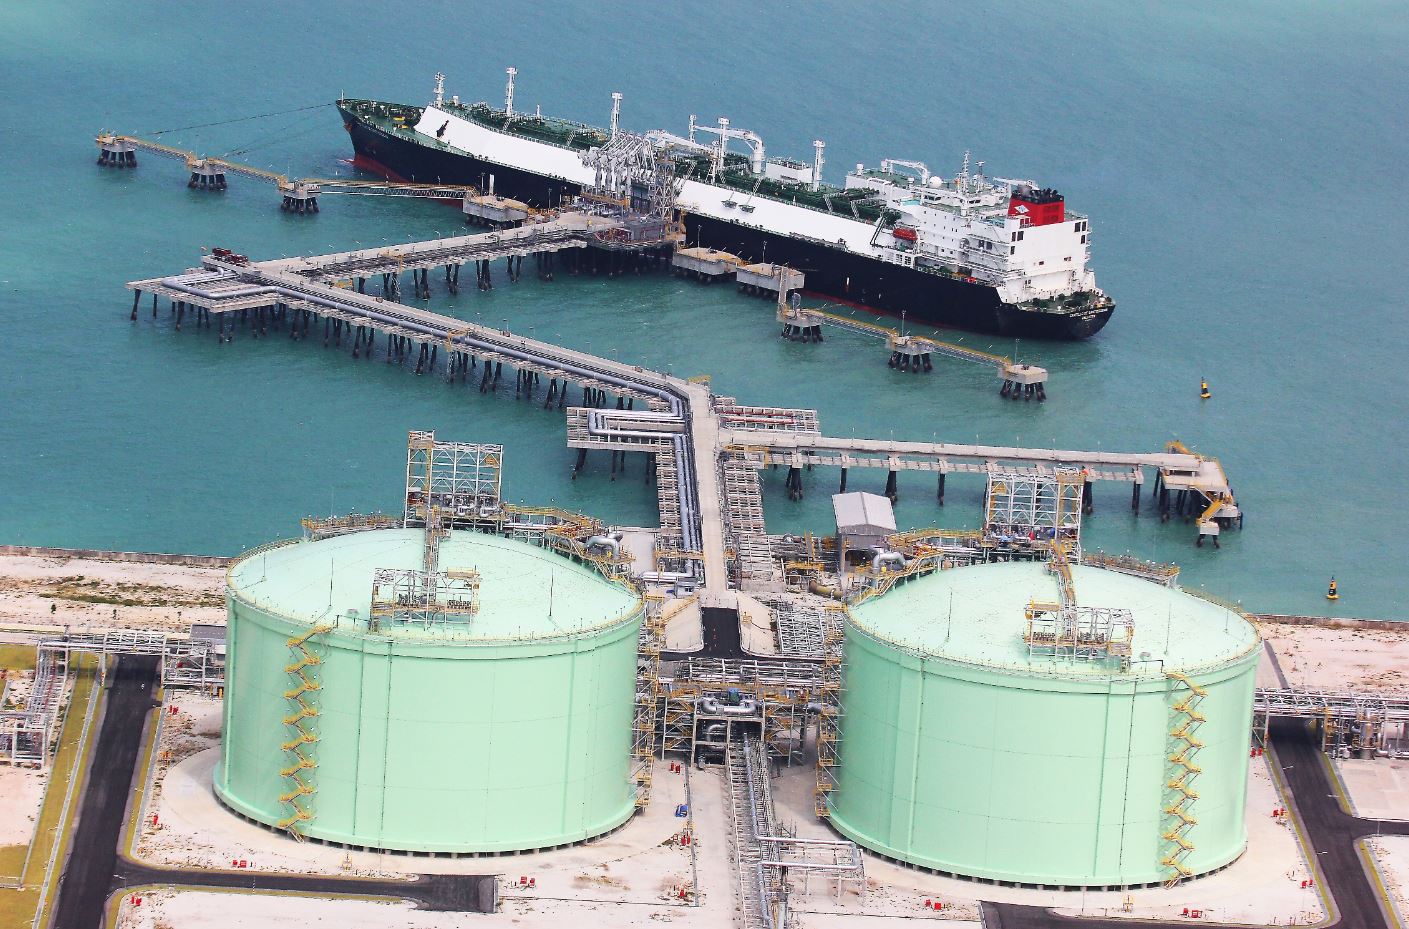 PTT shifts LNG trading focus to China